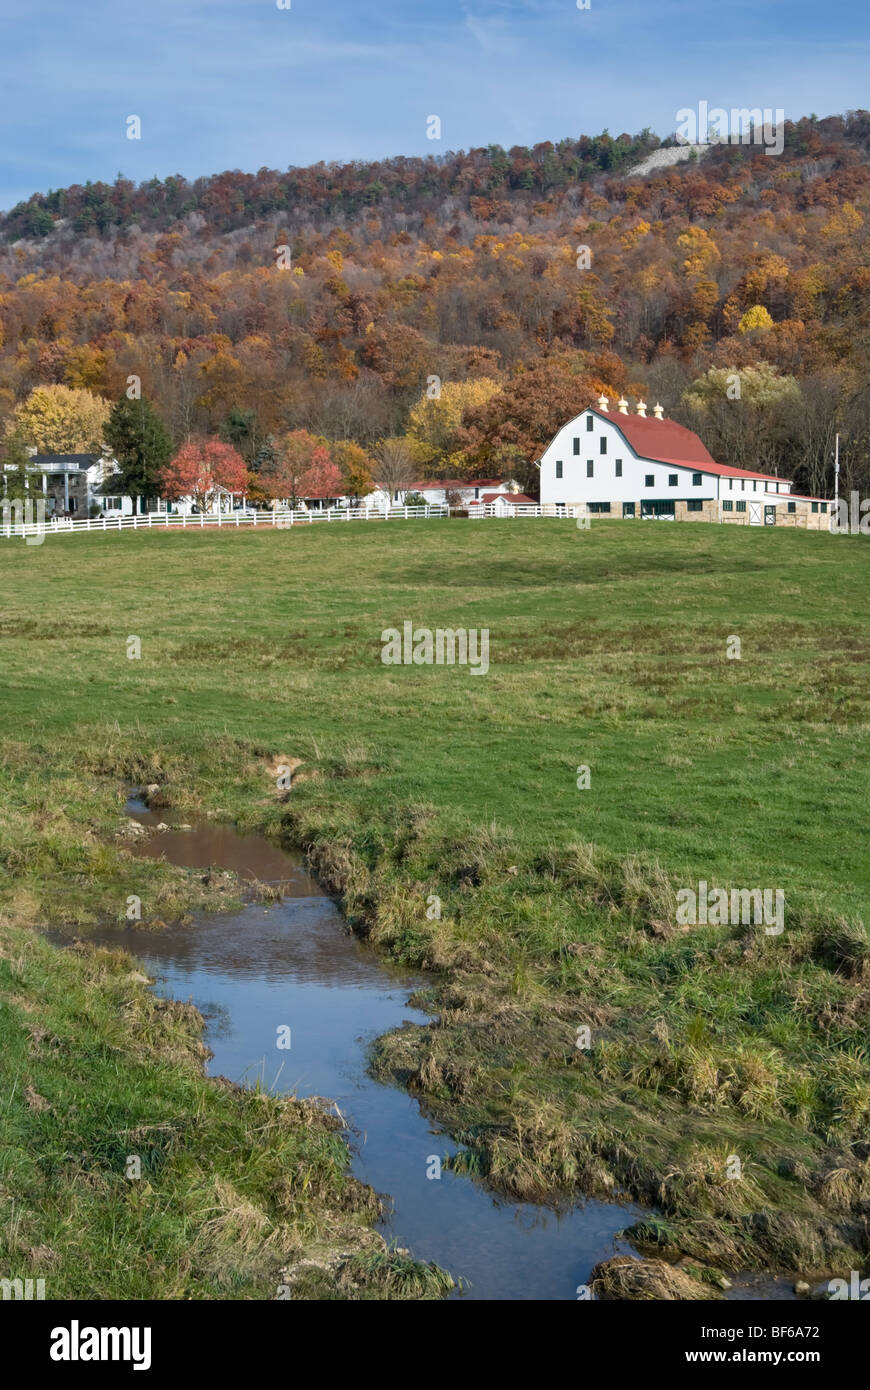 Stock photo of white barn against fall mountainside in Pennsylvania, with run off stream flowing in foreground. Stock Photo